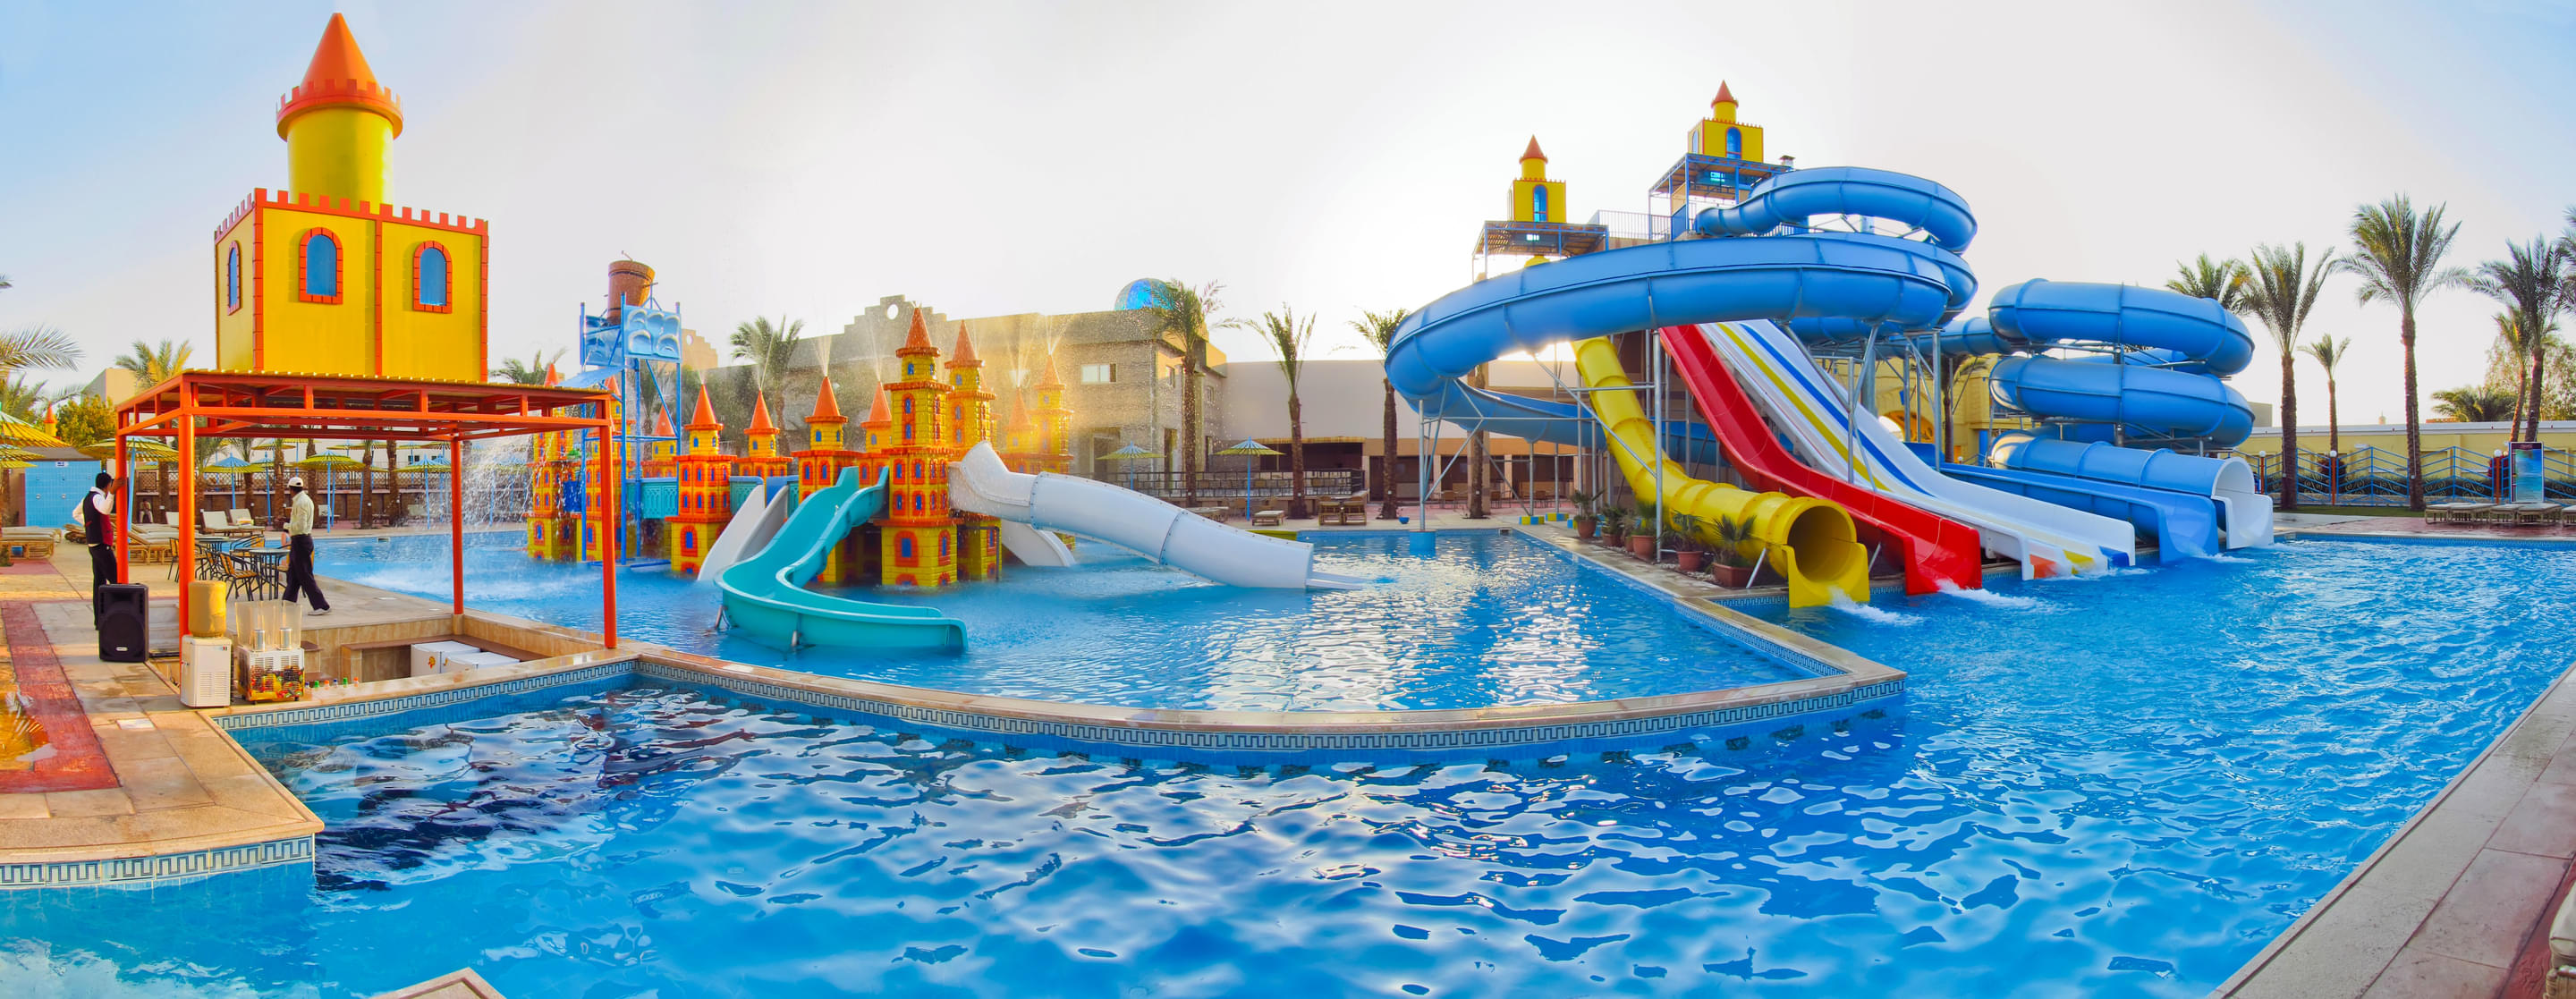 Best Water Parks in Singapore